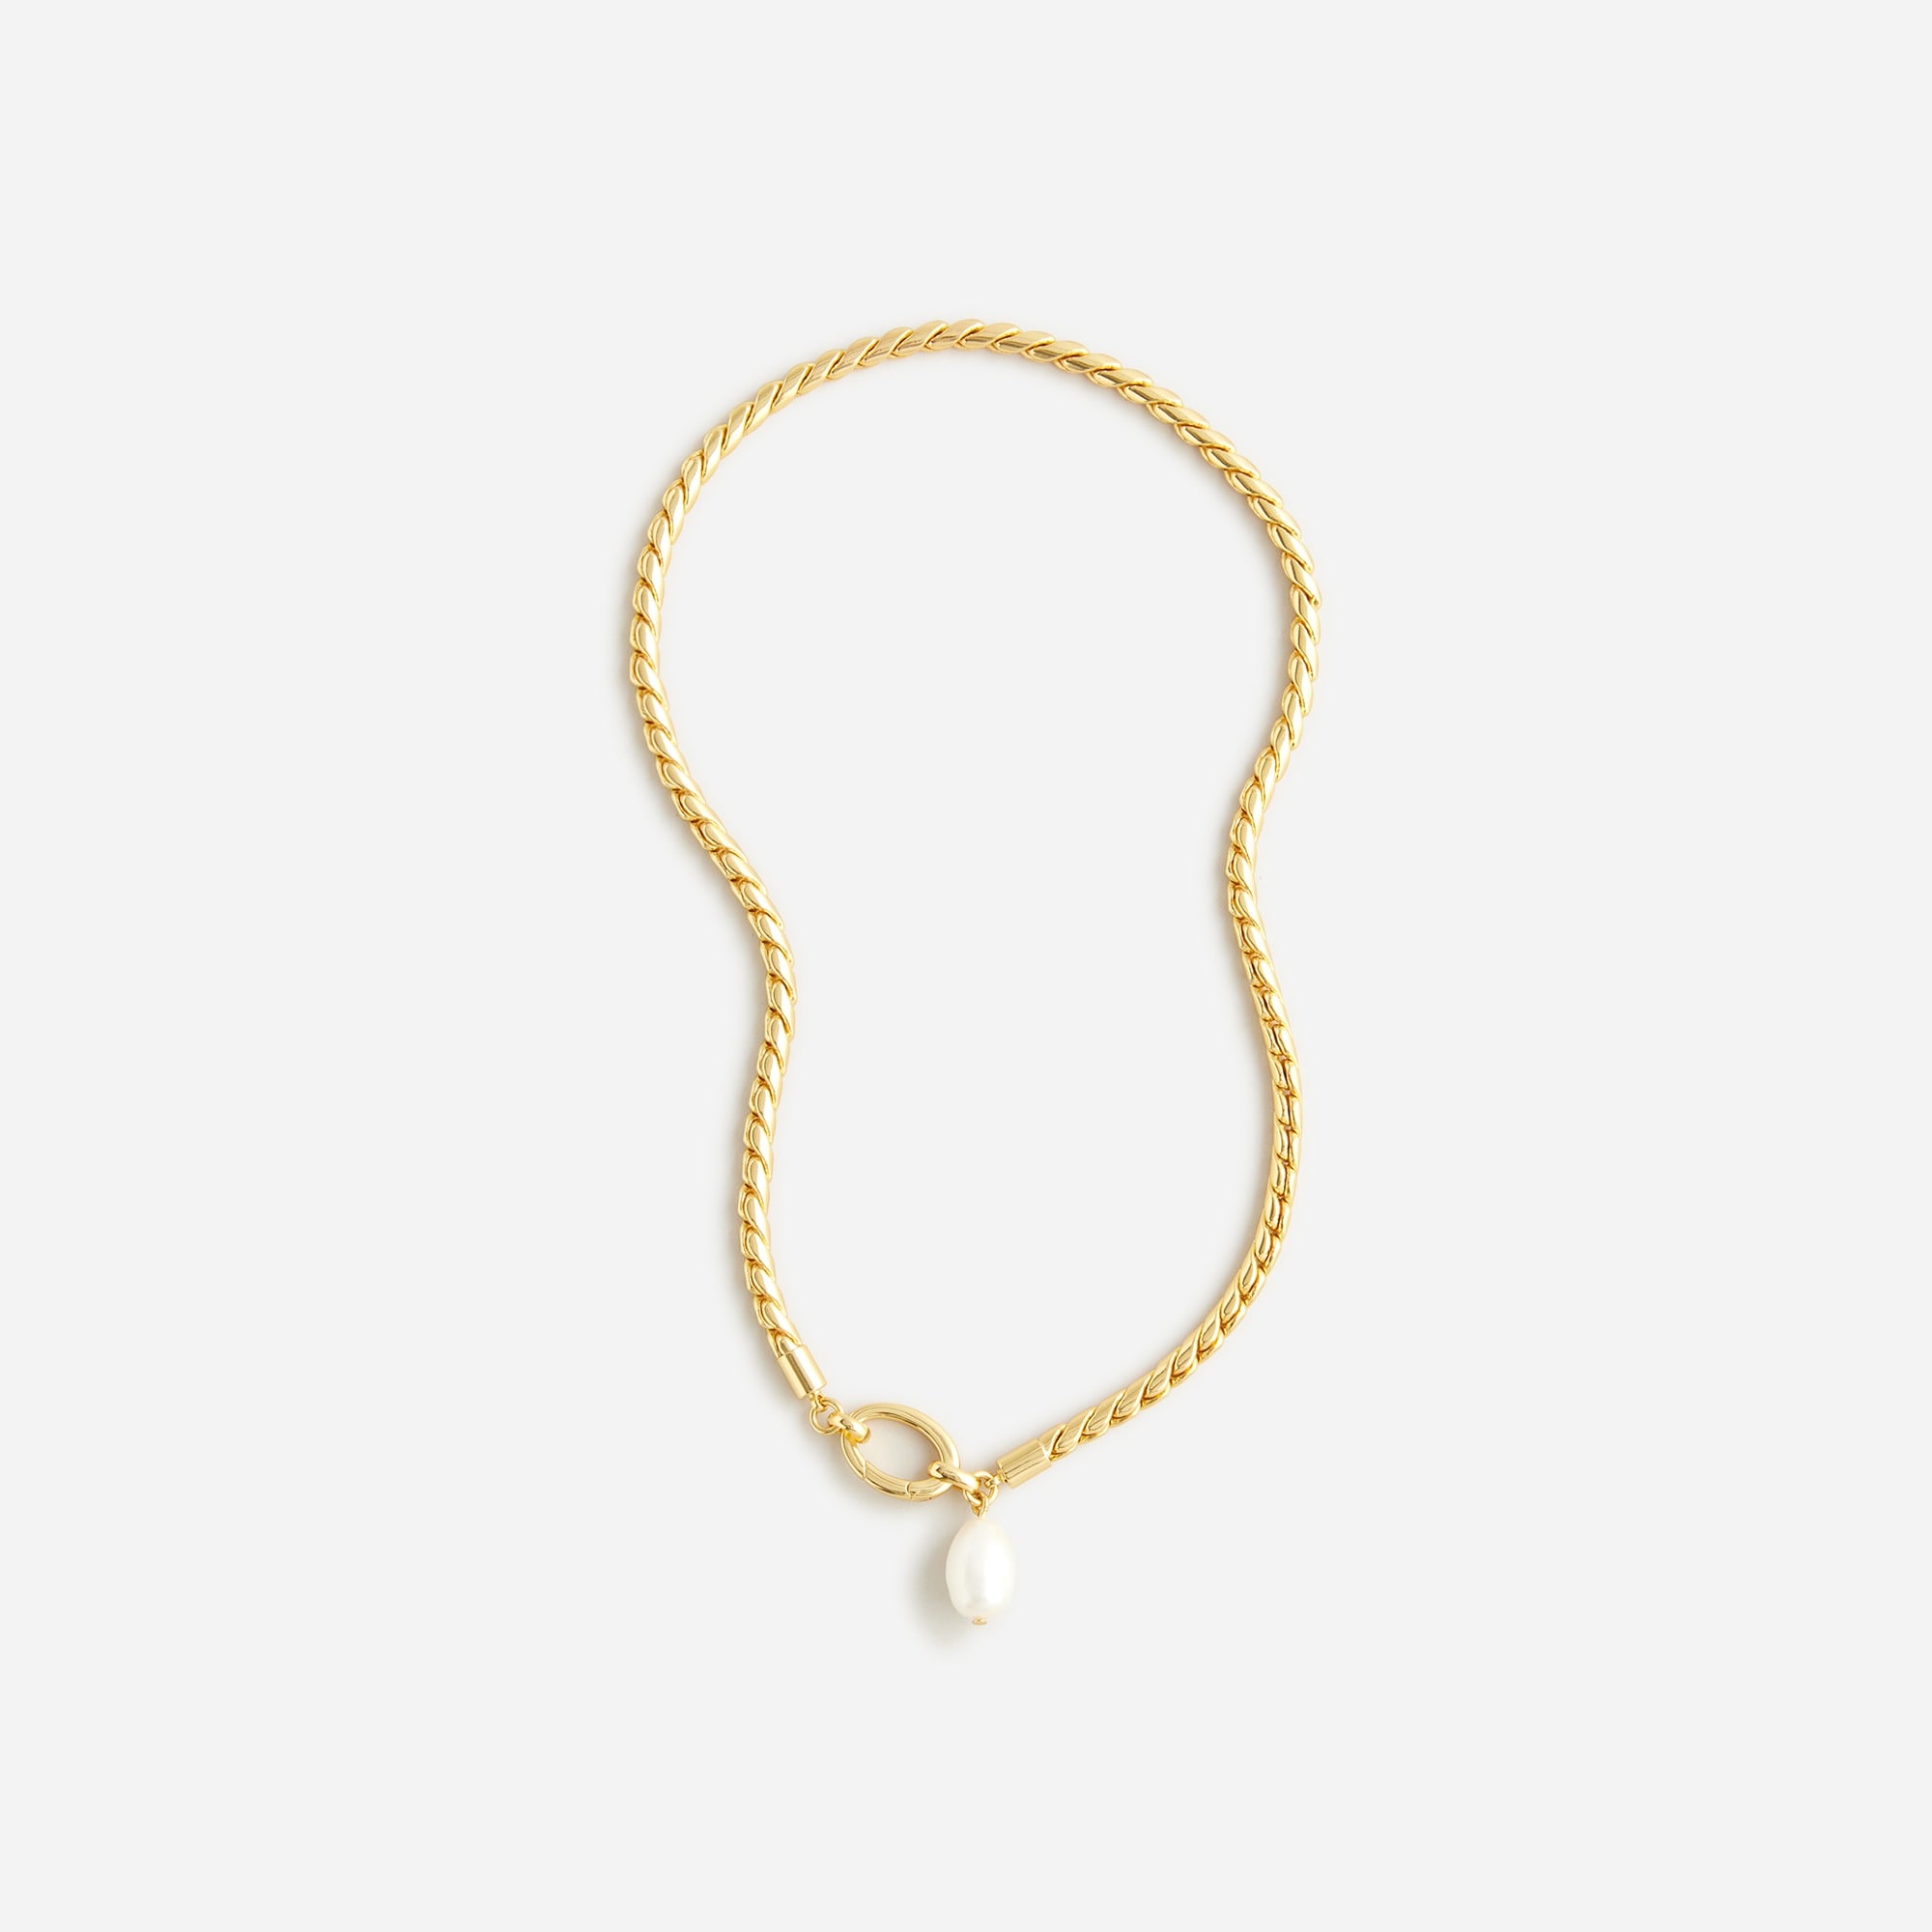  Rope chain freshwater pearl necklace